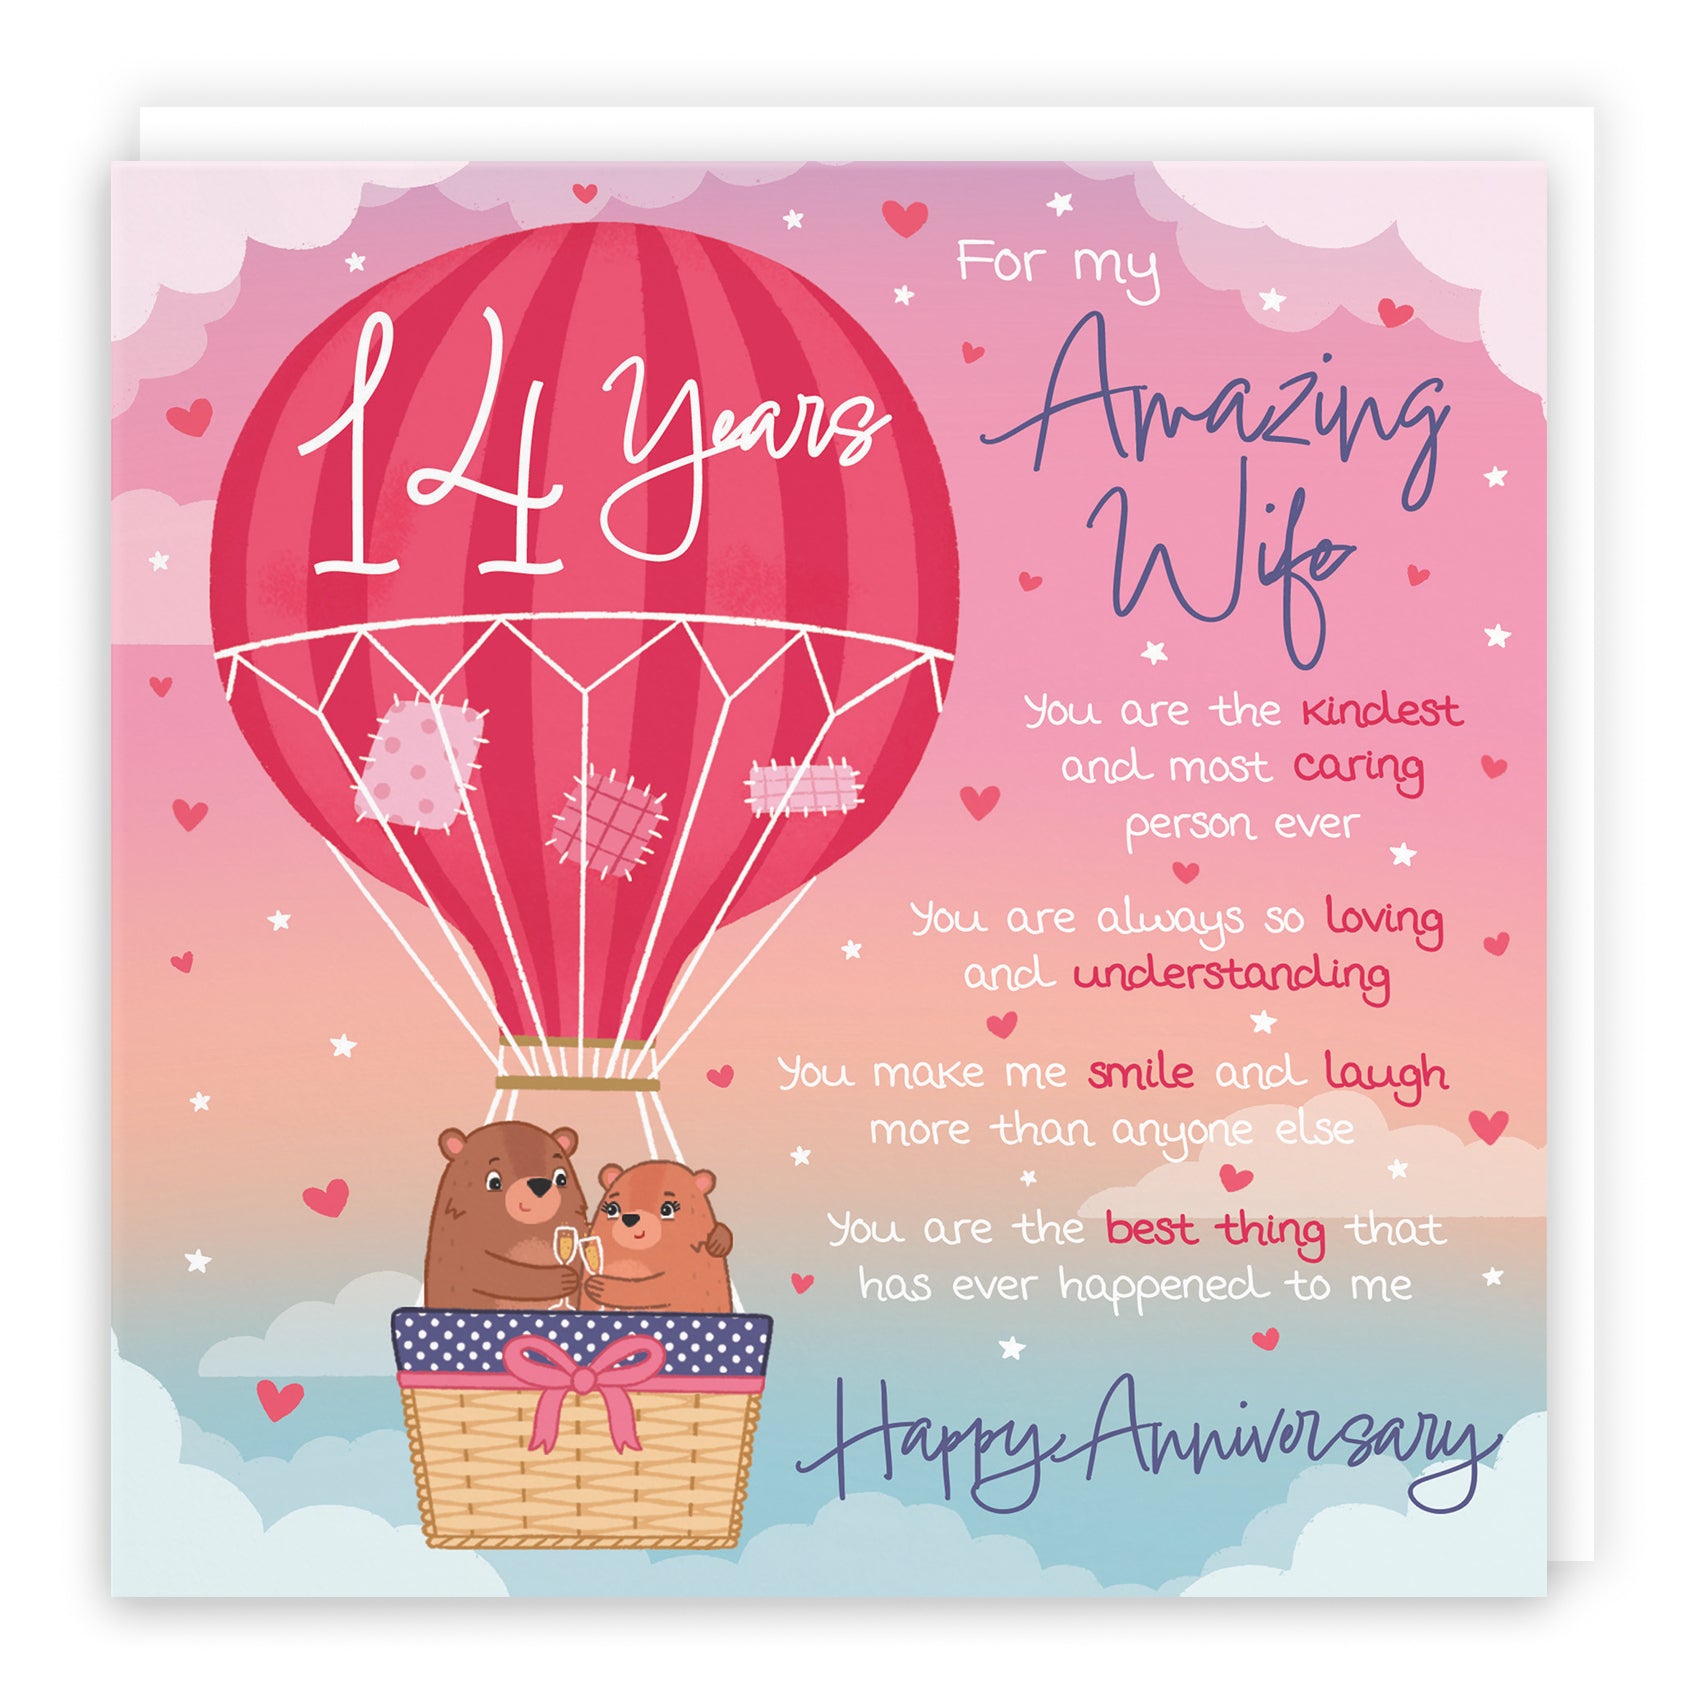 Wife 14th Anniversary Poem Card Love Is In The Air Cute Bears